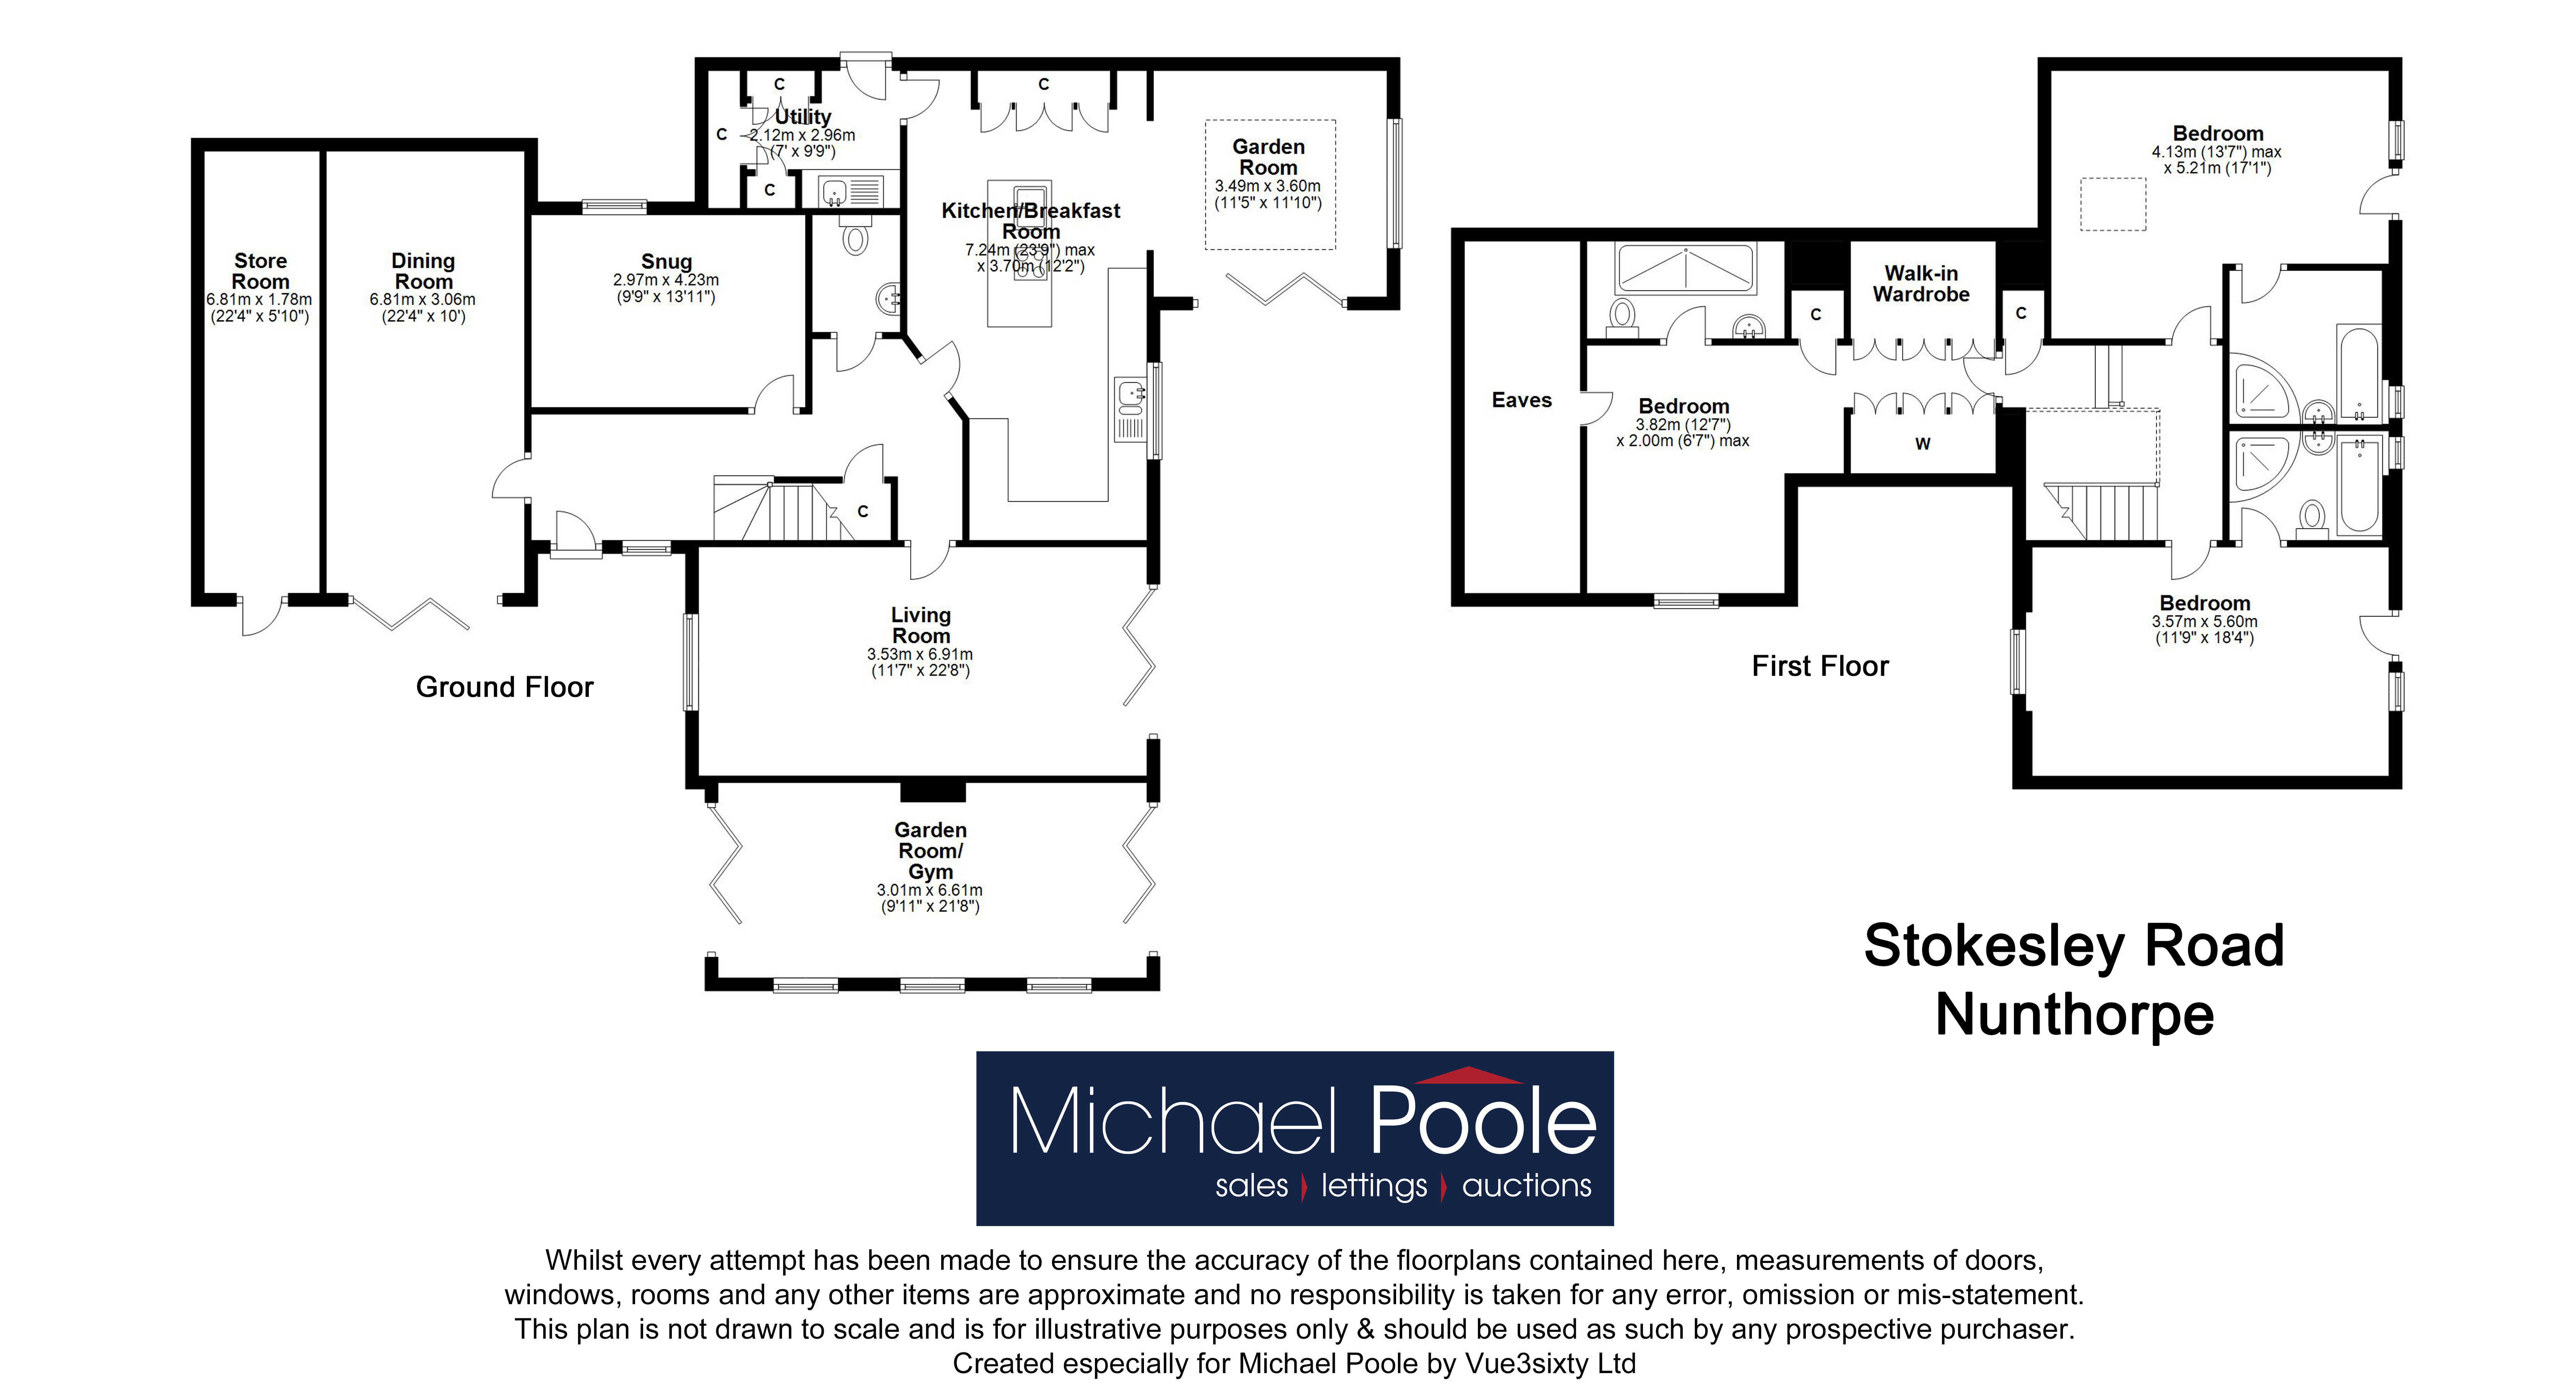 3 bed house for sale in Stokesley Road, Nunthorpe - Property floorplan